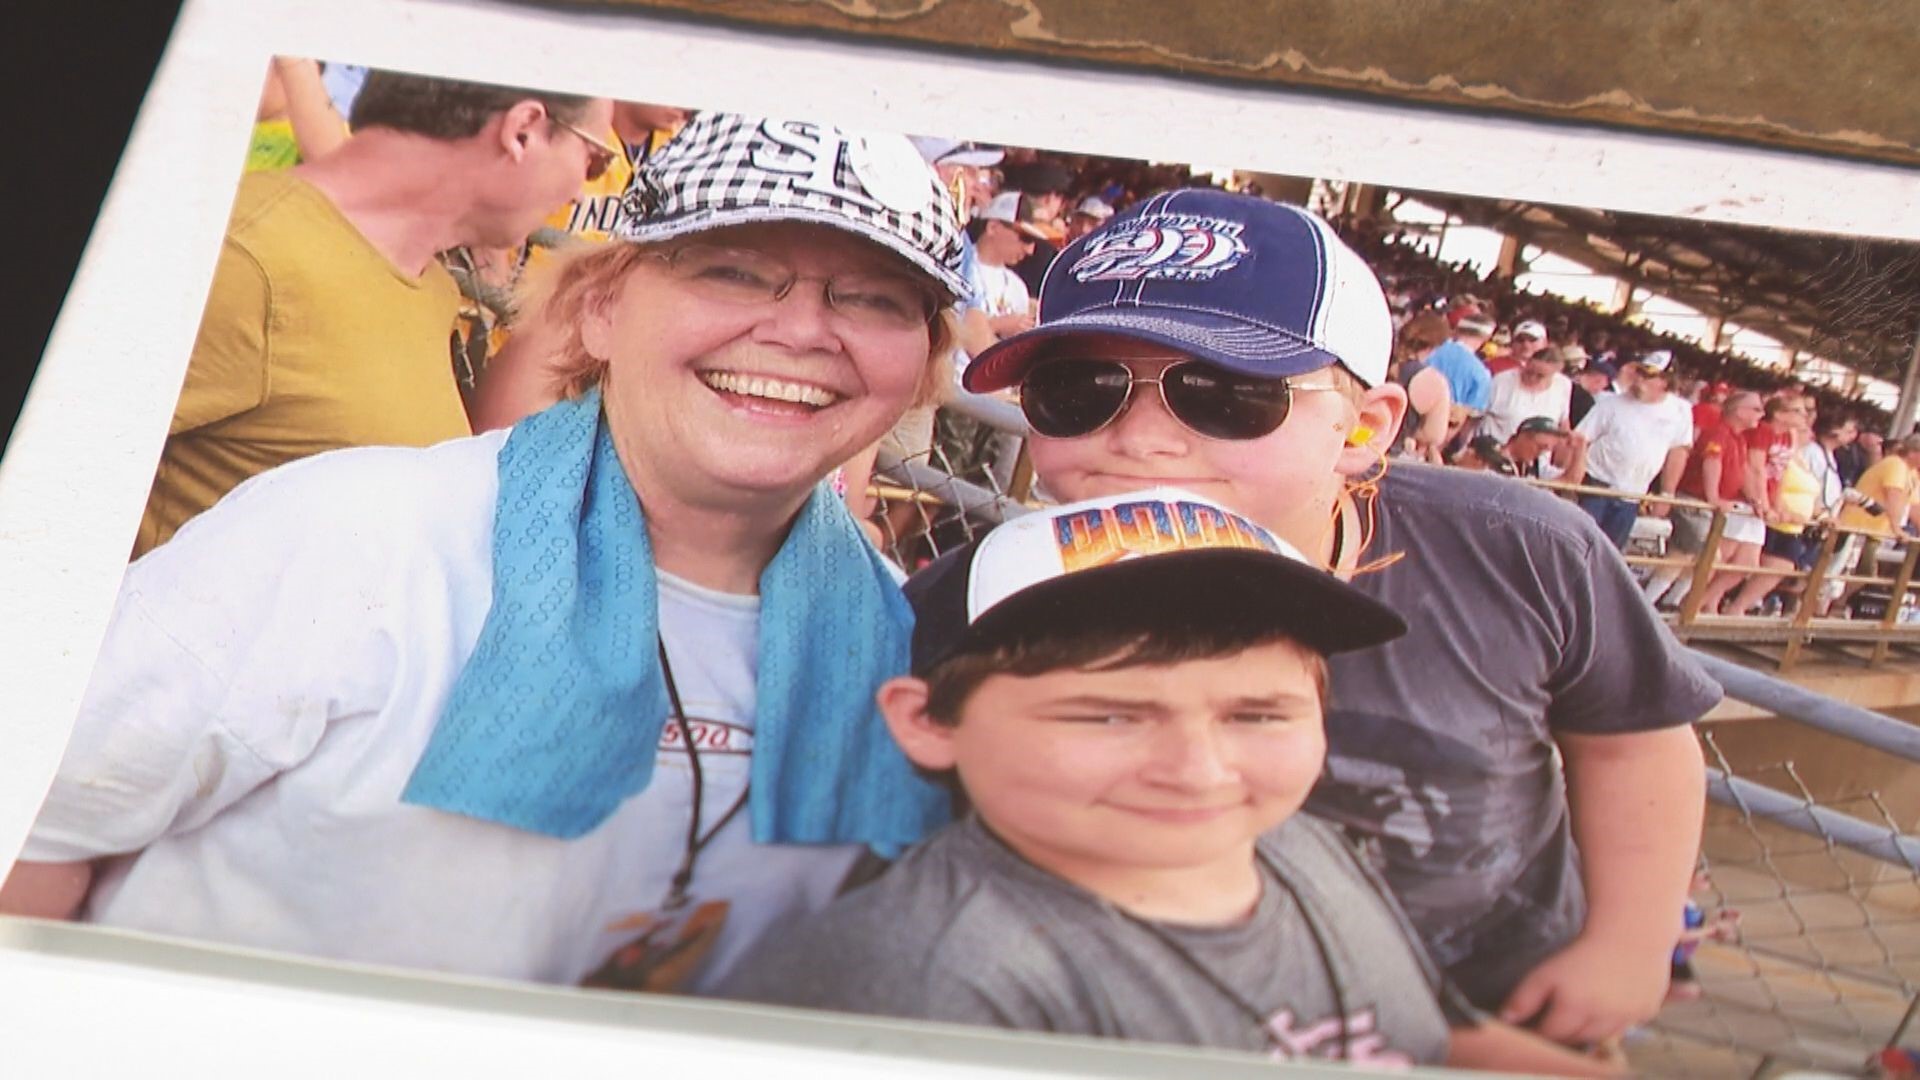 "Once you're an Indy 500 fan you're really into it for life," said Ann Mullen Bronsing.